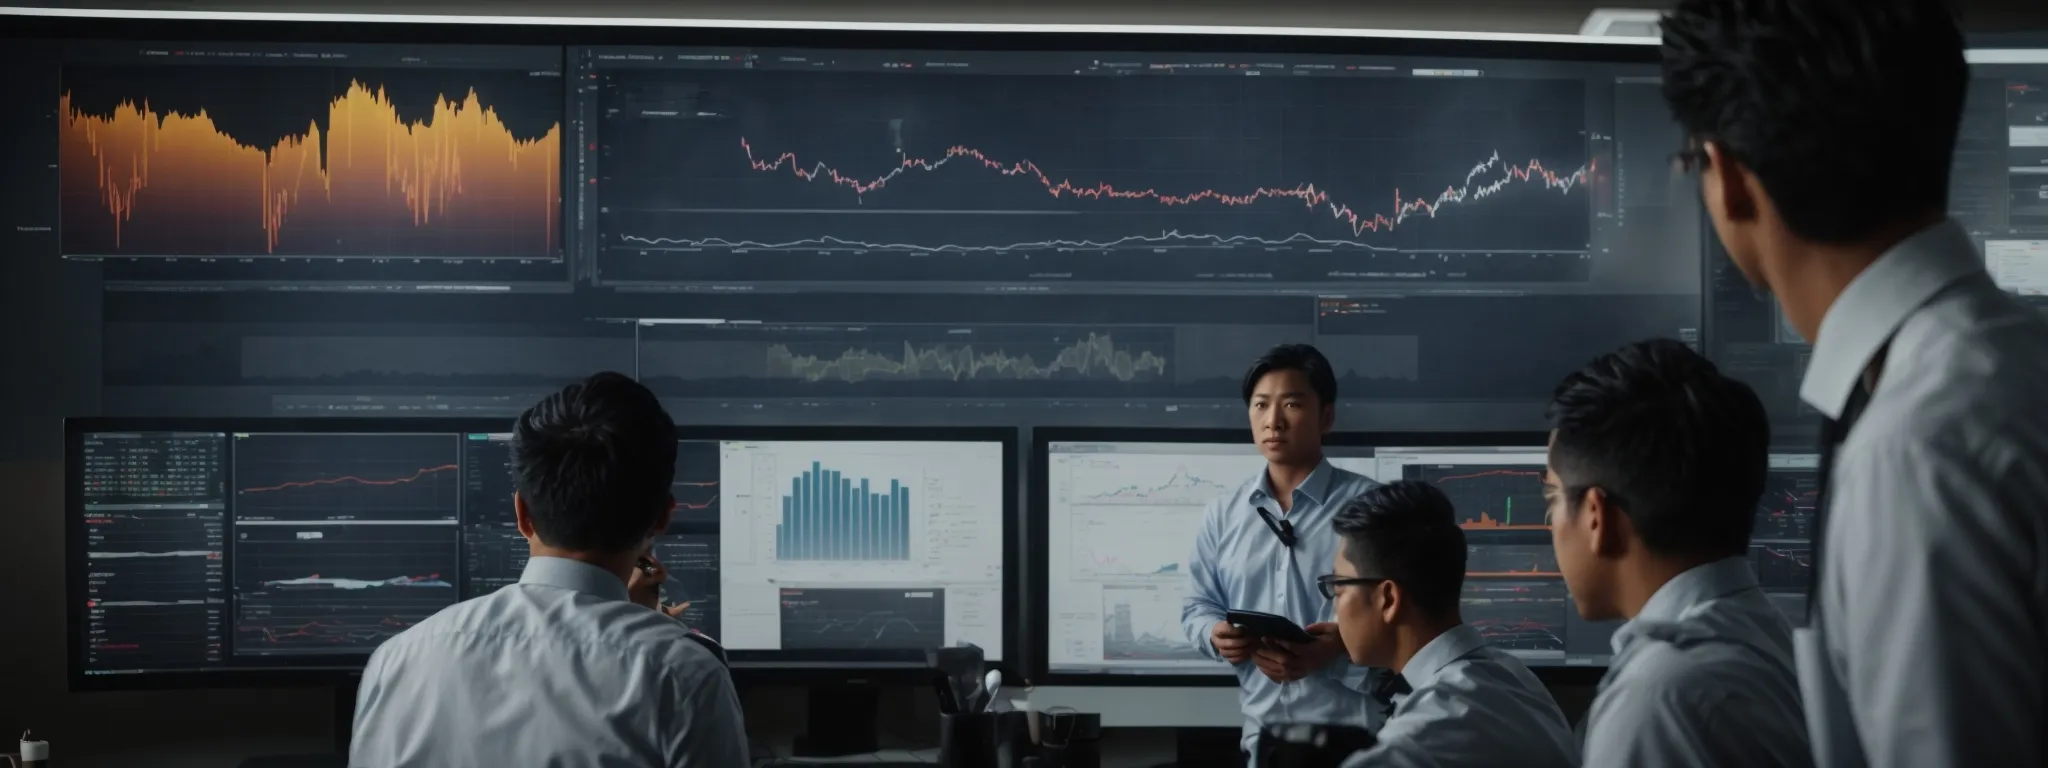  a group of professionals analyzes charts and graphs on a large monitor, reflecting website analytics and performance metrics.